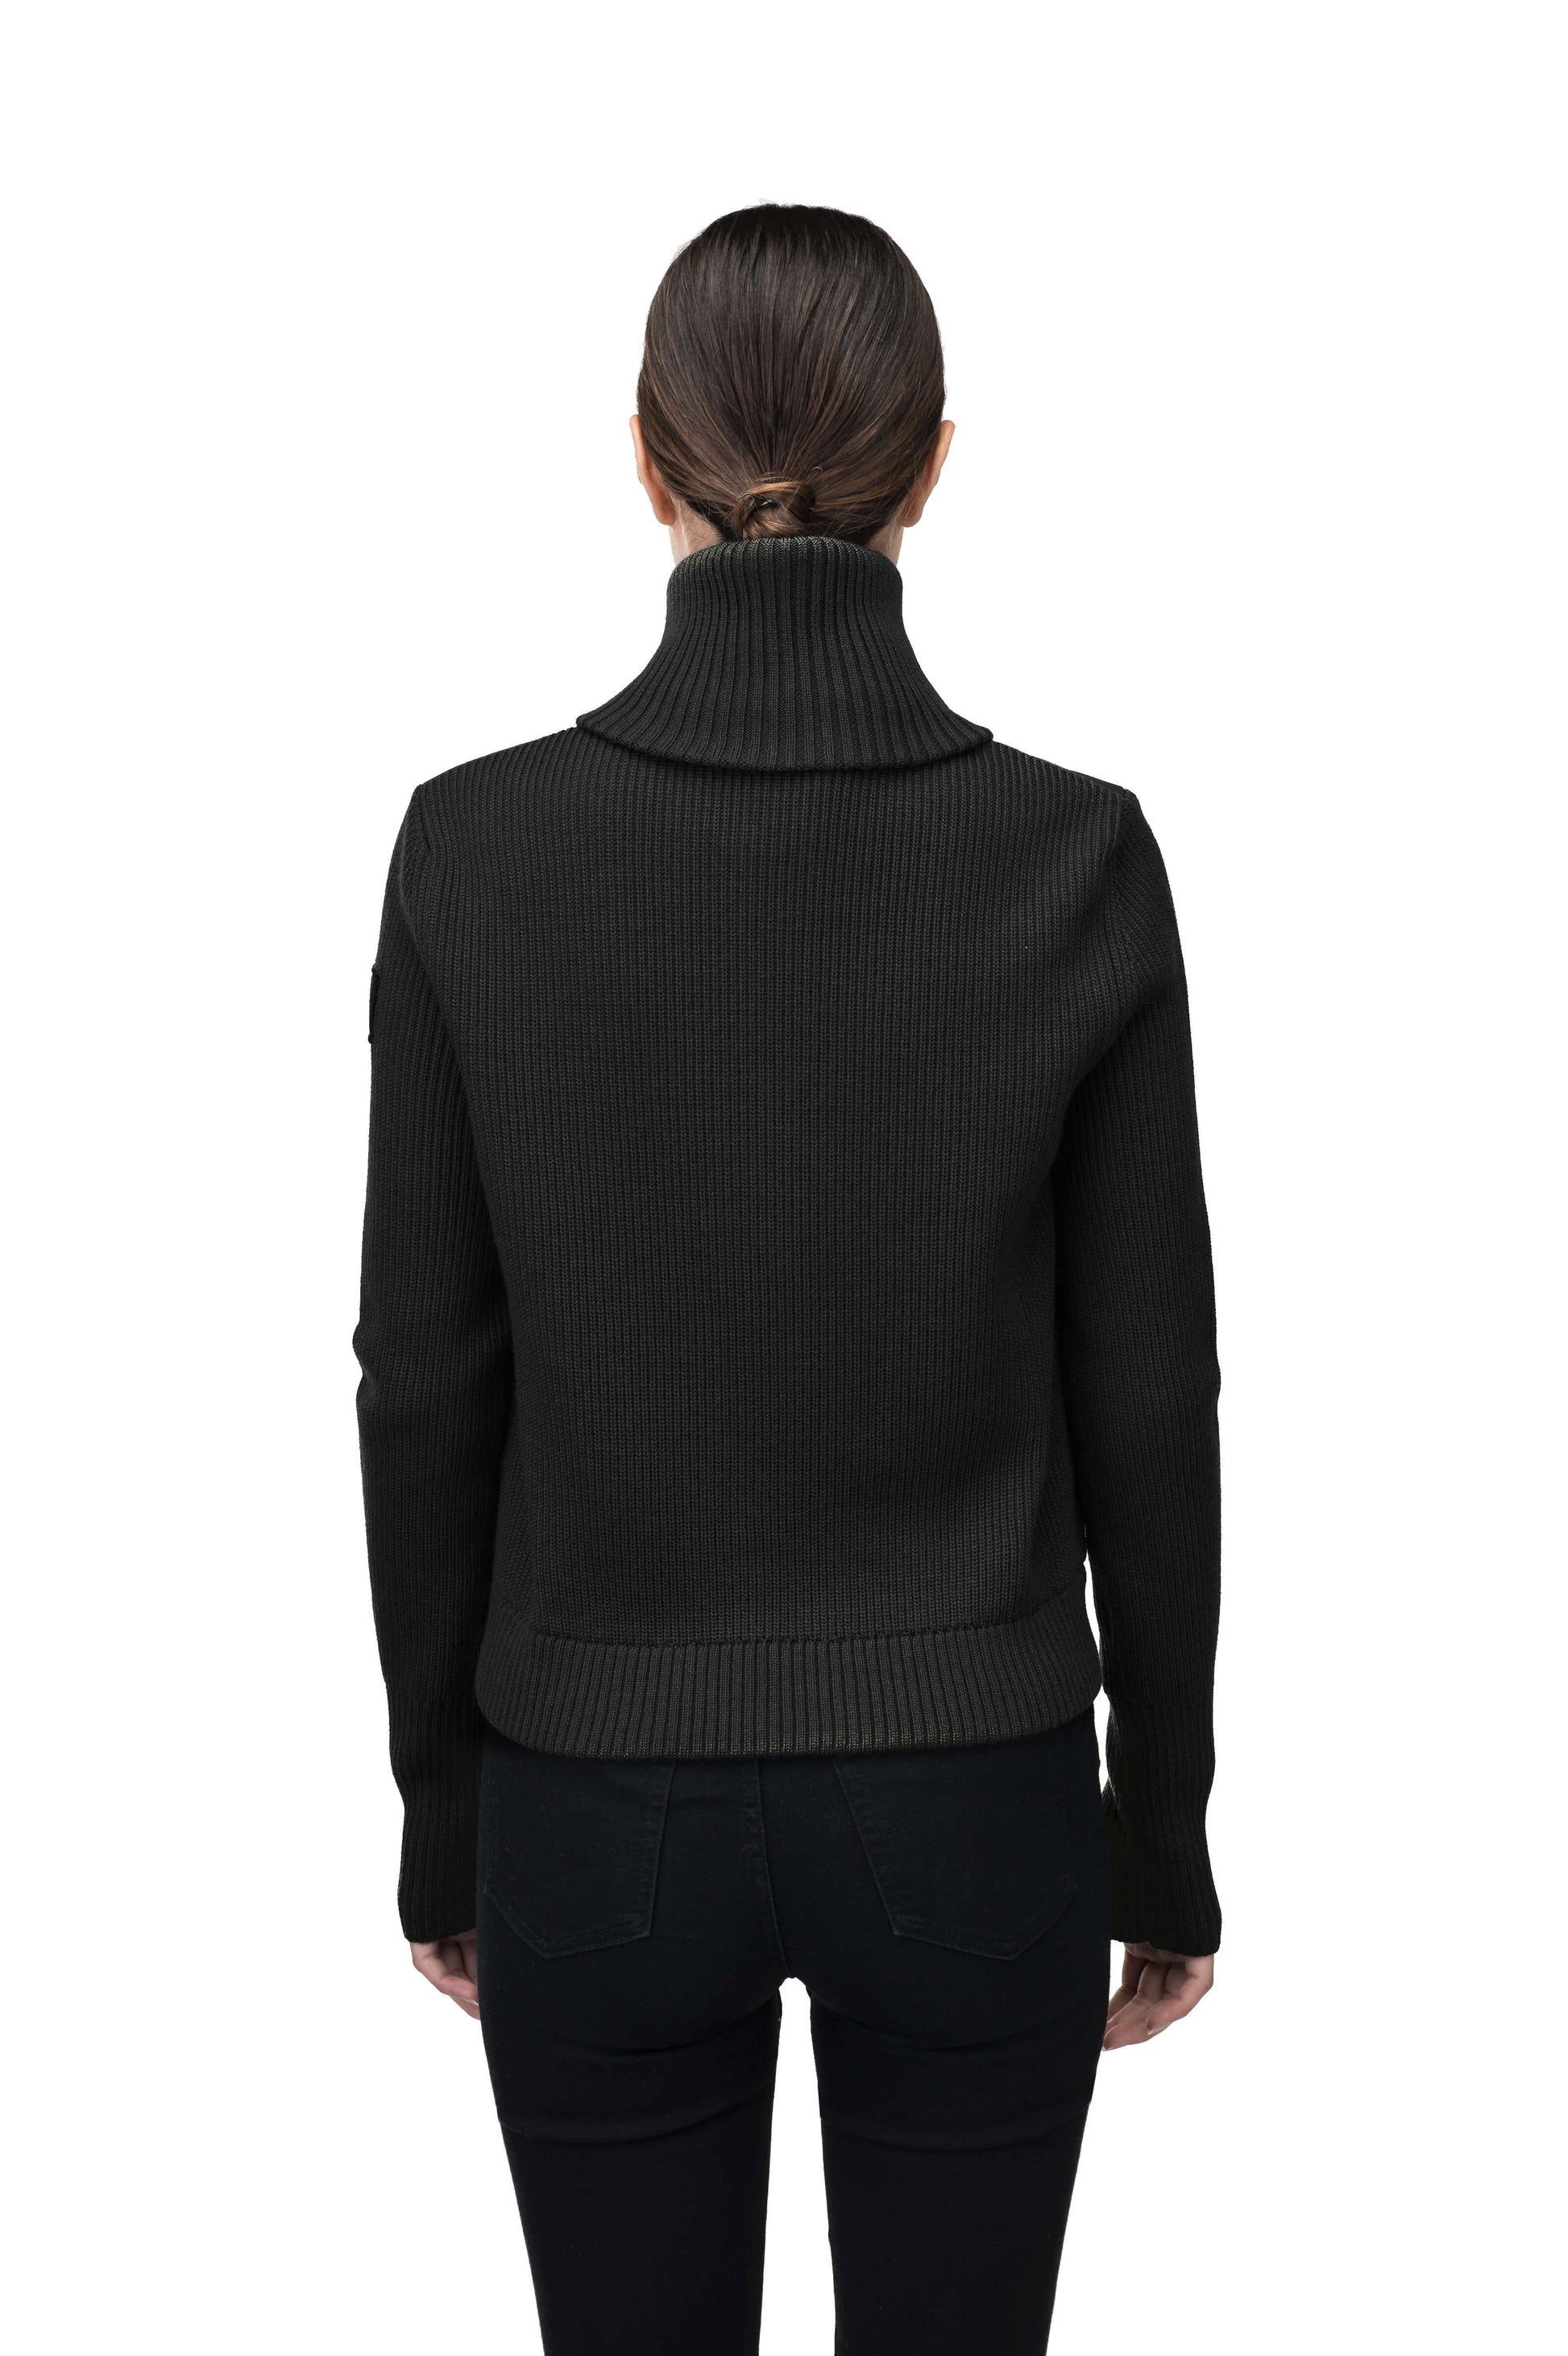 Ada Ladies Quilted Full Zip Sweater in hip length, PrimaLoft Gold Insulation Active+, Durable 4-Way Stretch Weave quilted torso, Merino wool knit collar, sleeves, back, and cuffs, two-way front zipper, and hidden waist pockets, in Black